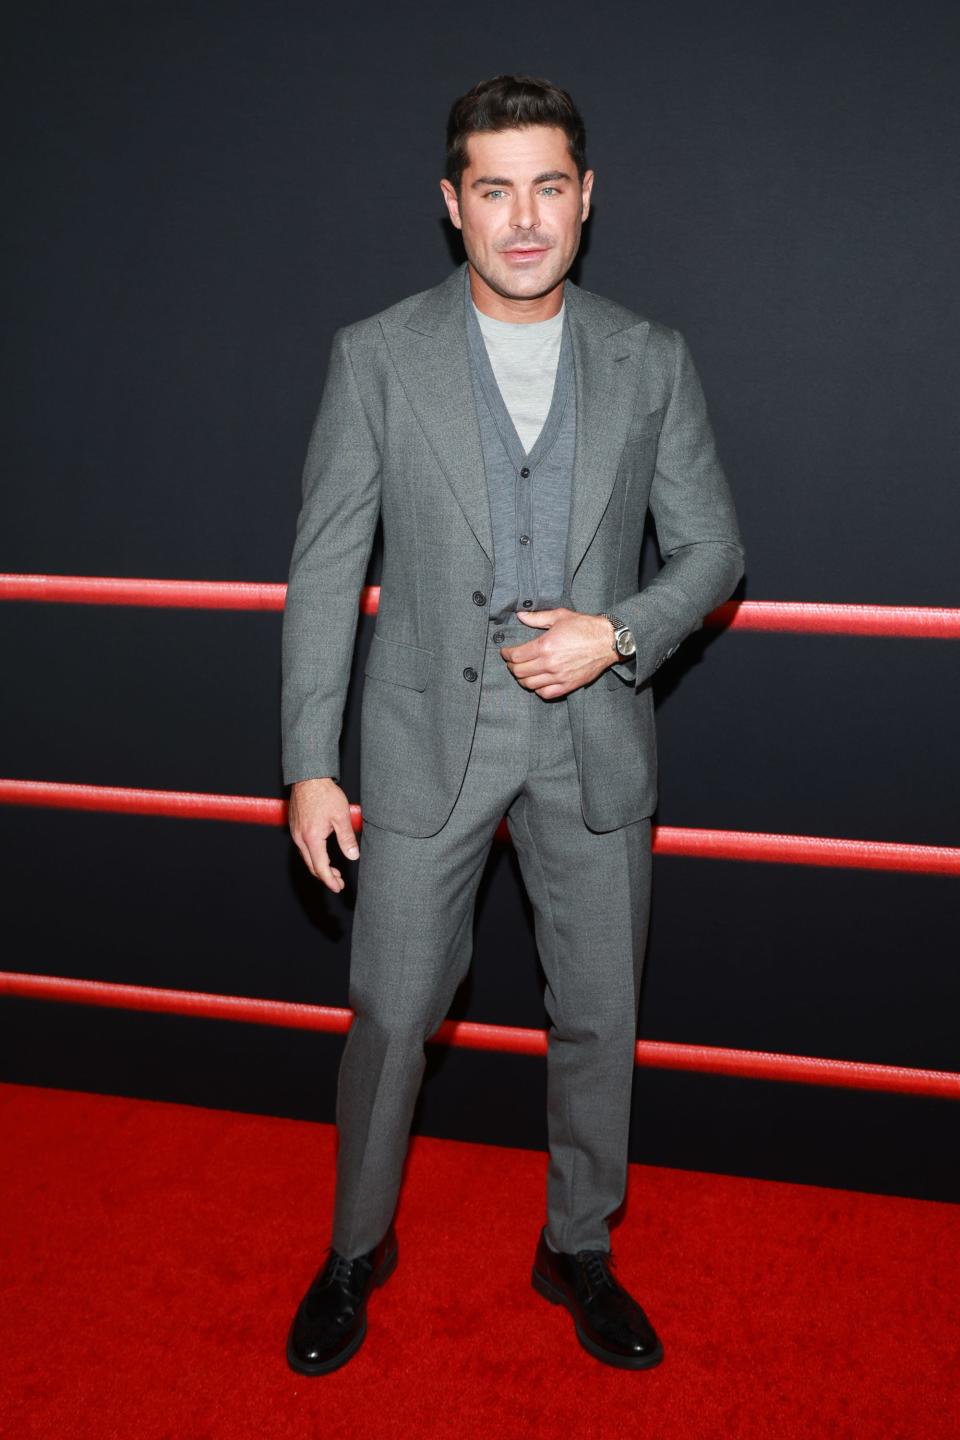 Zac Efron in grey suit at "The Iron Claw" premiere